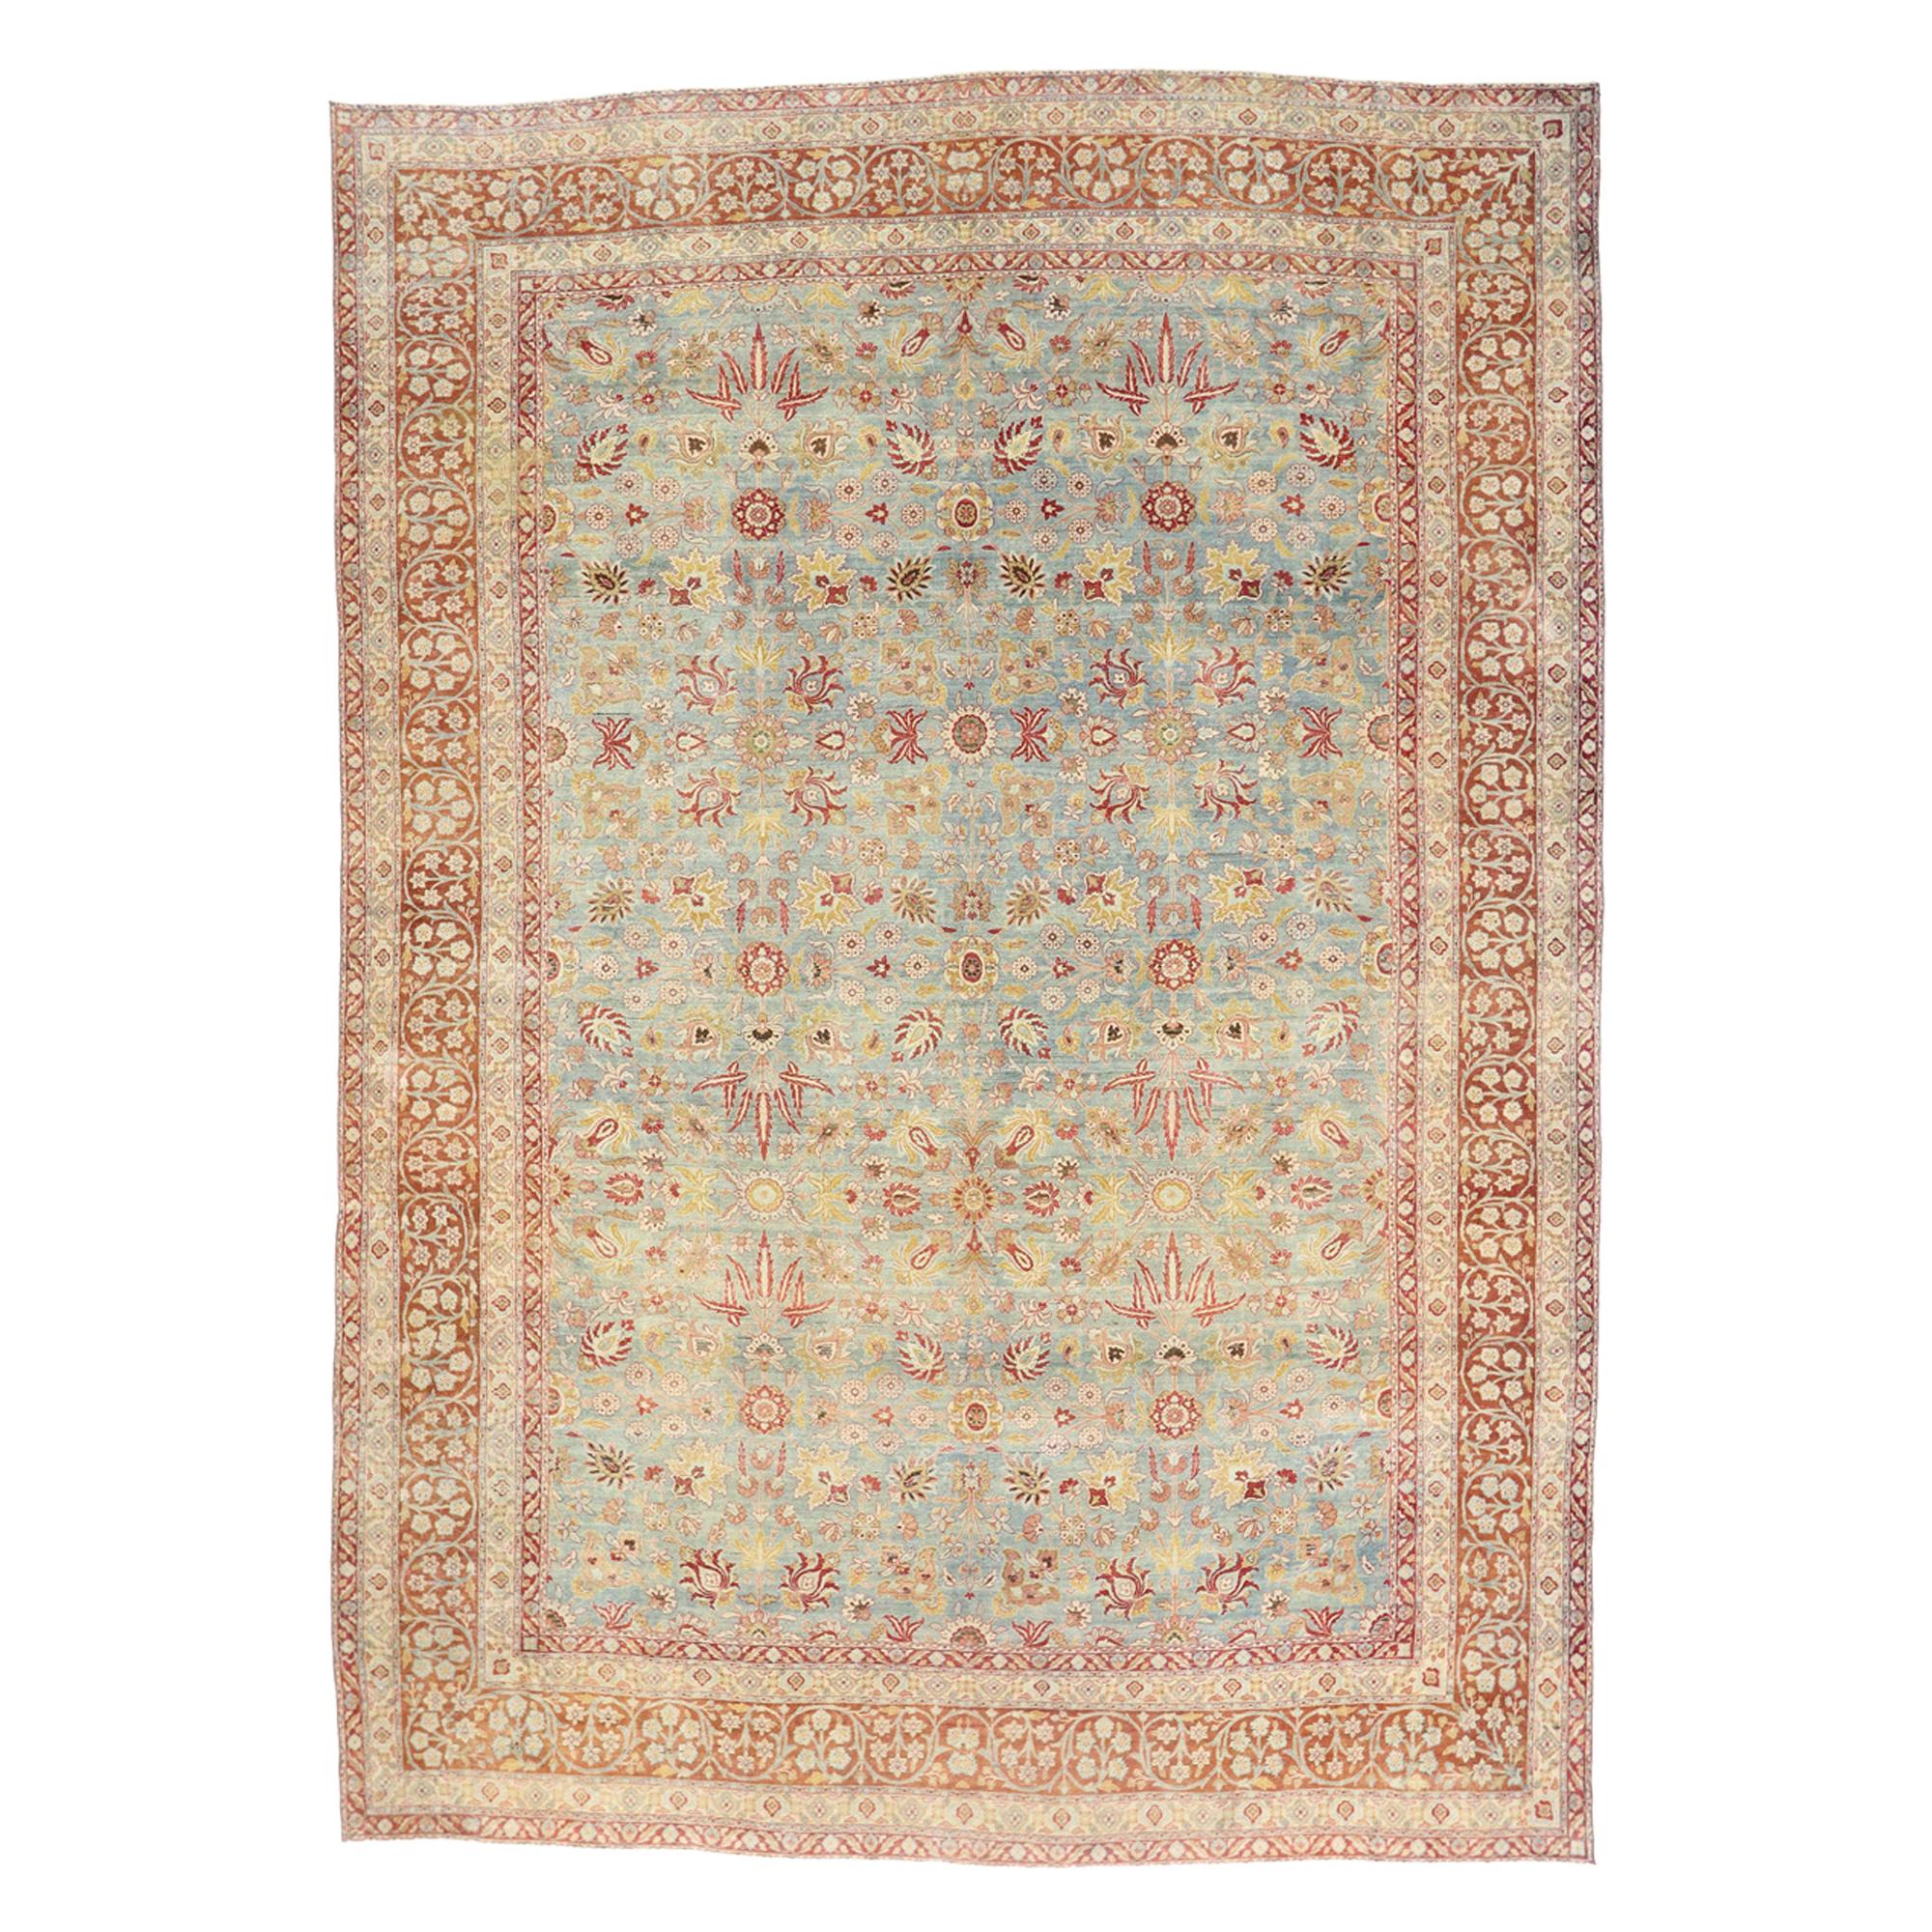 Distressed Antique Persian Kerman Rug with Southern Living and Colonial Style